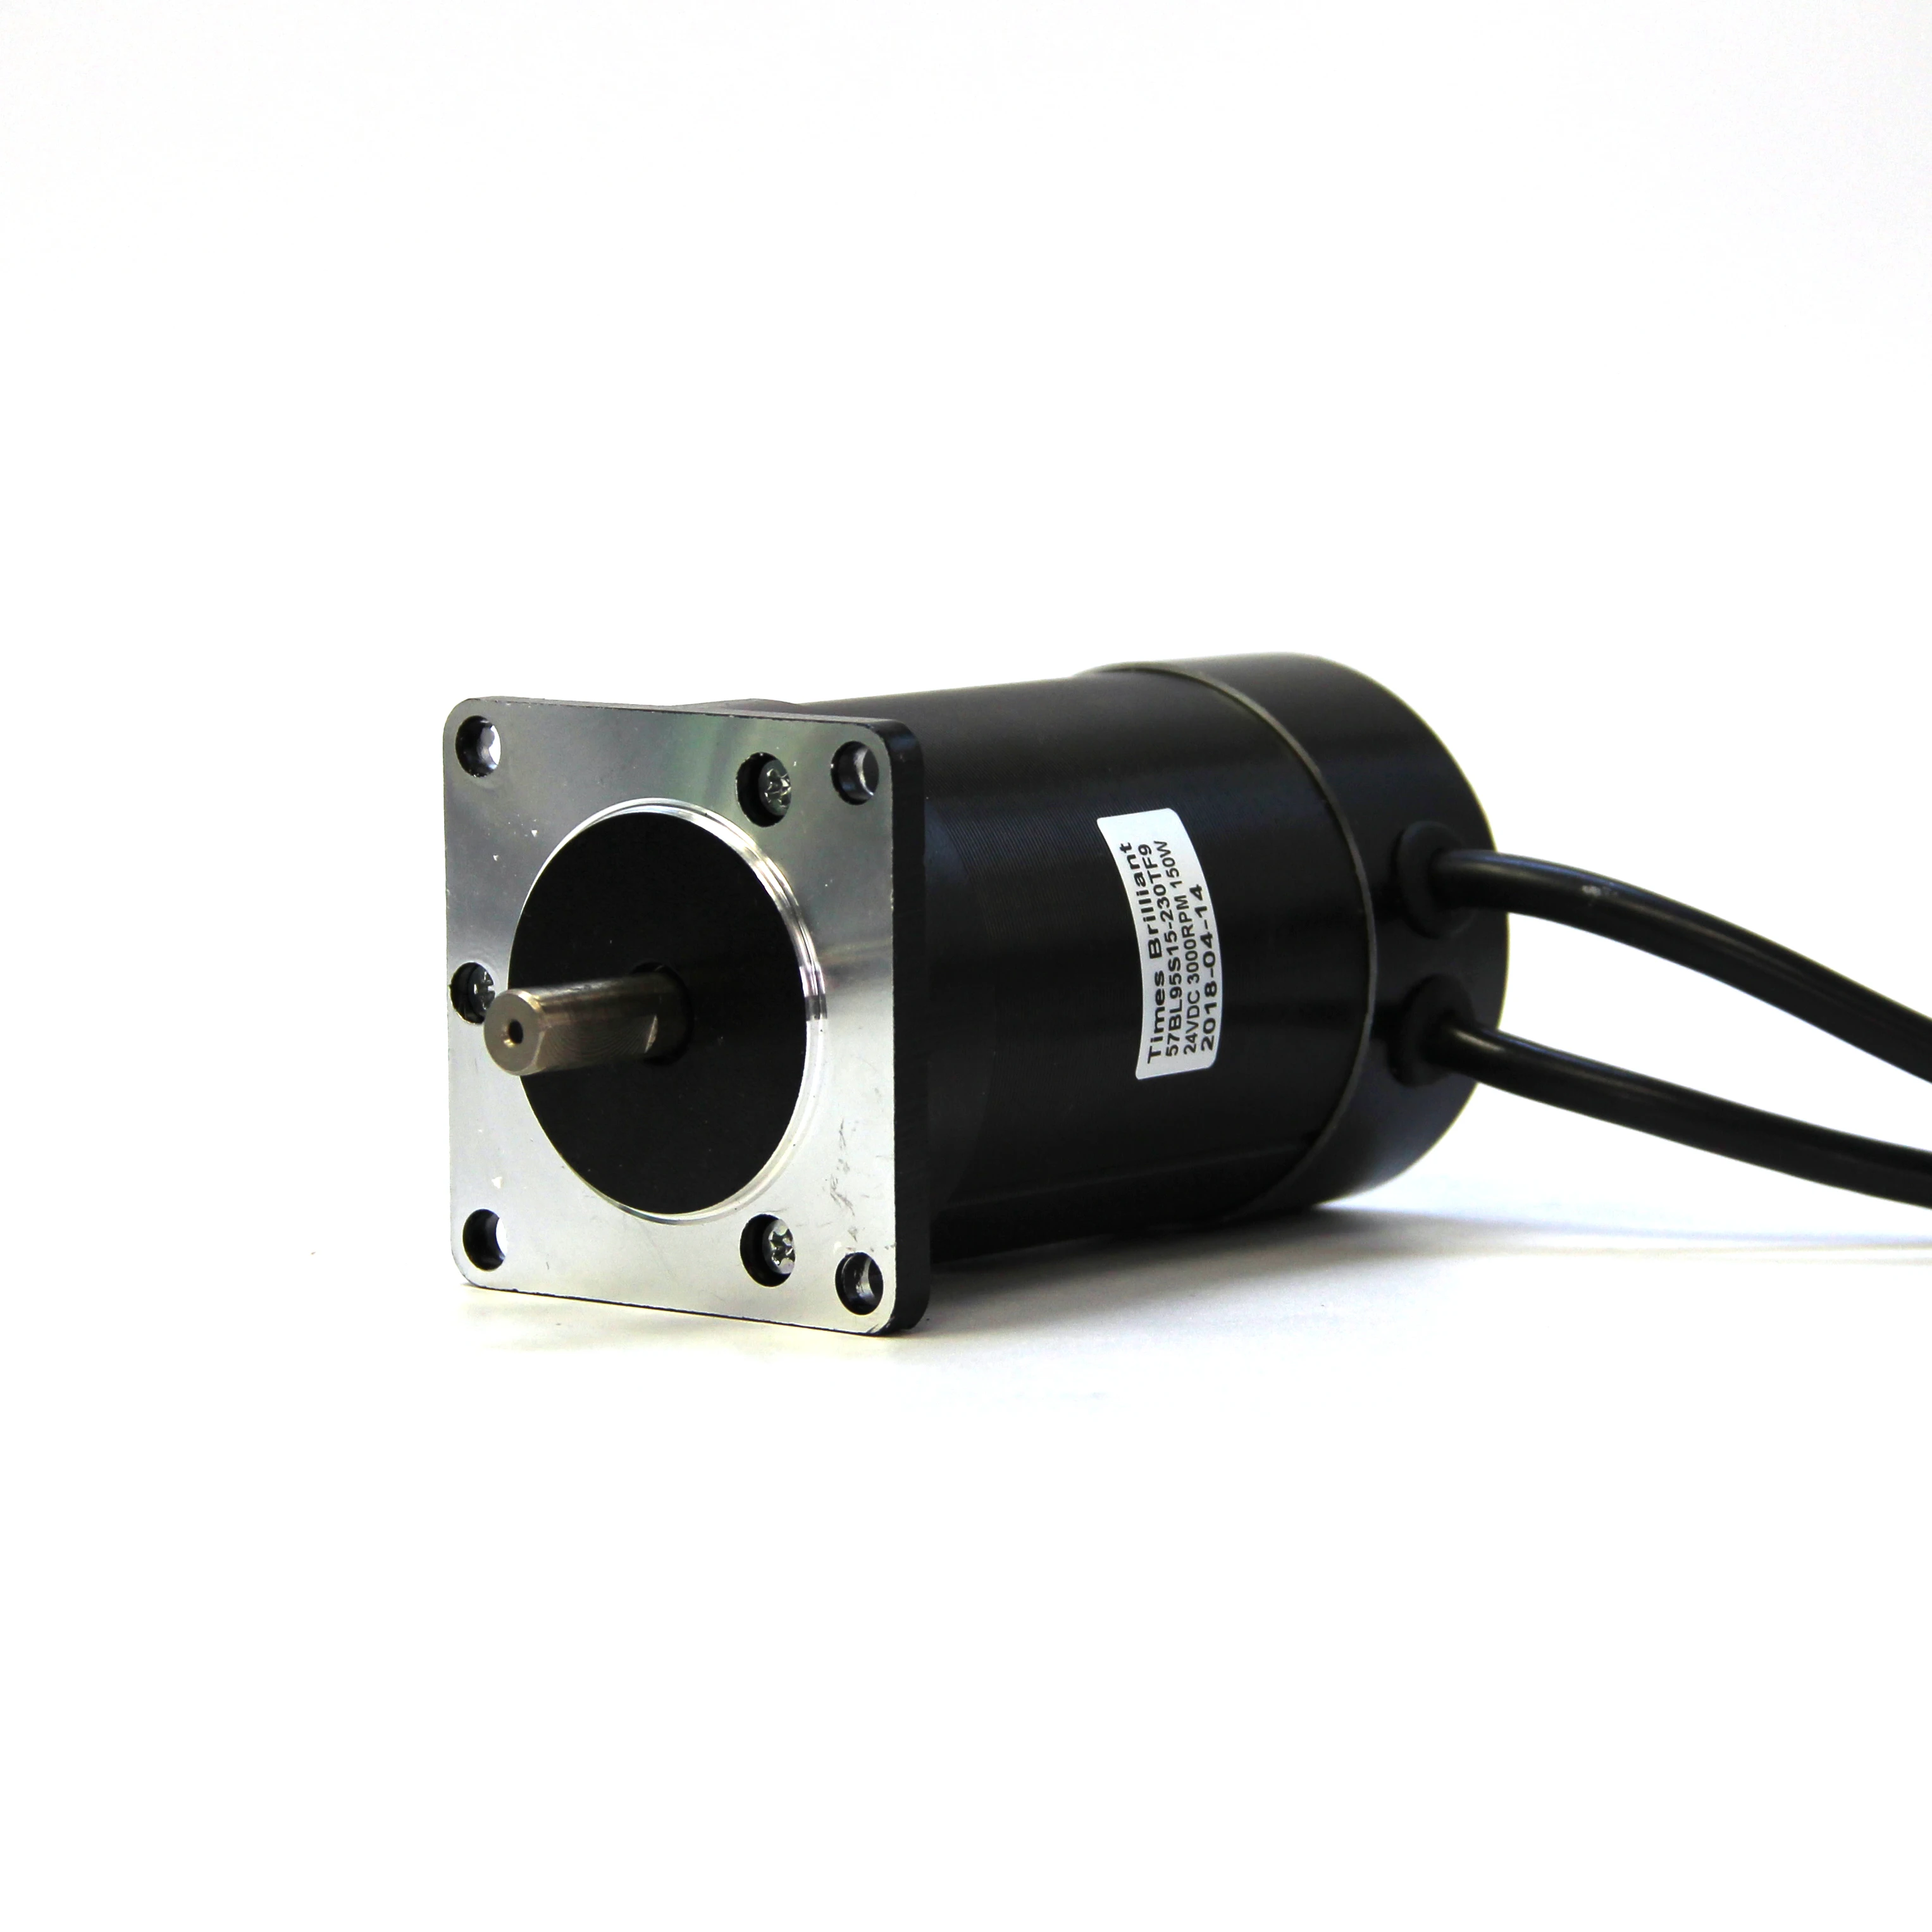 1000rpm low speed  60W small bldc electric motor 24v brushless dc motor with driver kit factory price enlarge